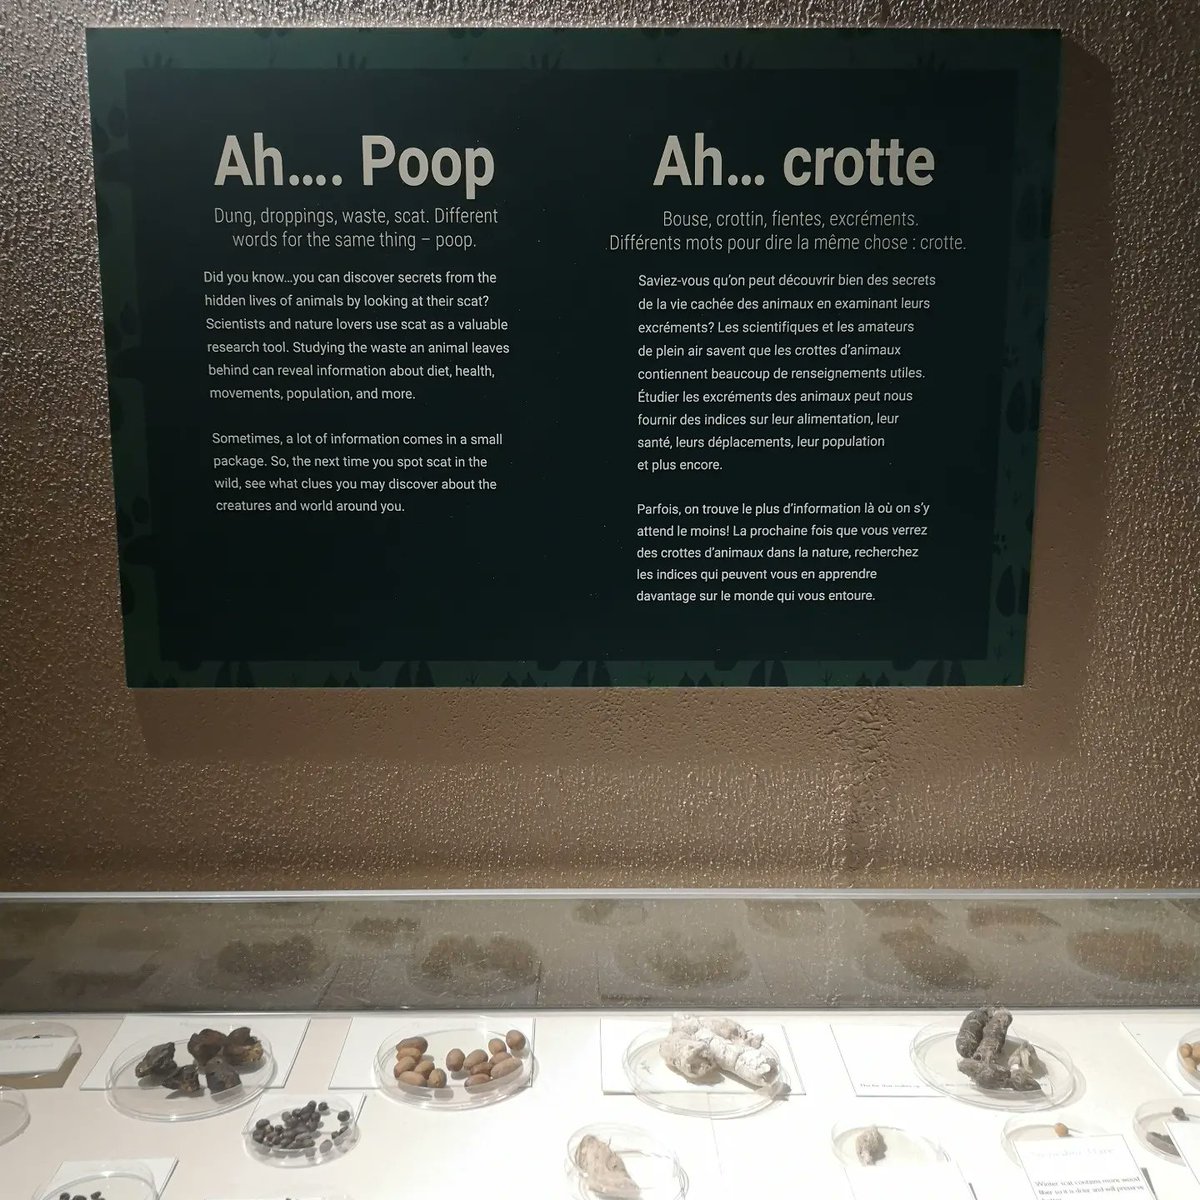 #Museum bowel movement!🤭

Our fan favourite poop case has a new location, new interpretive panel and a new look! 

Check out local scat during your next Museum visit. 💩

#NaturalHistory #NovaScotia #FridayMorning